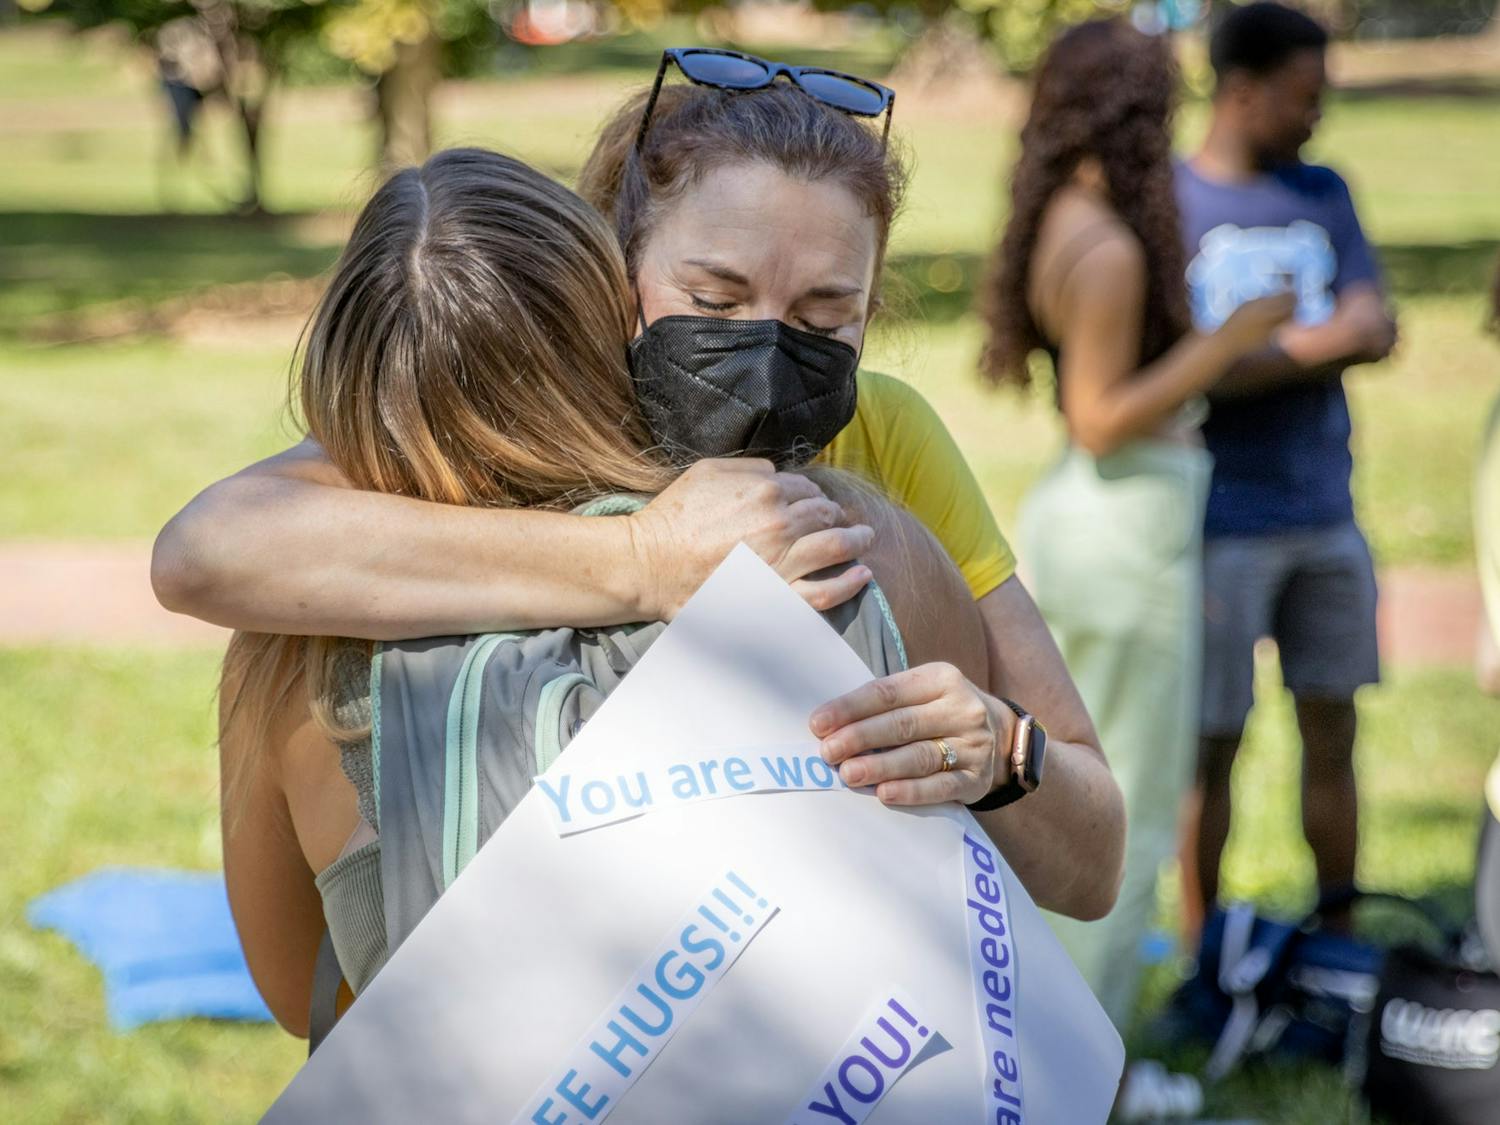 The Chapel Hill community came together in many ways this week to support mental health on campus, including dogs from Eyes Ears Nose and Paws and a parent rally organized by a Facebook group.